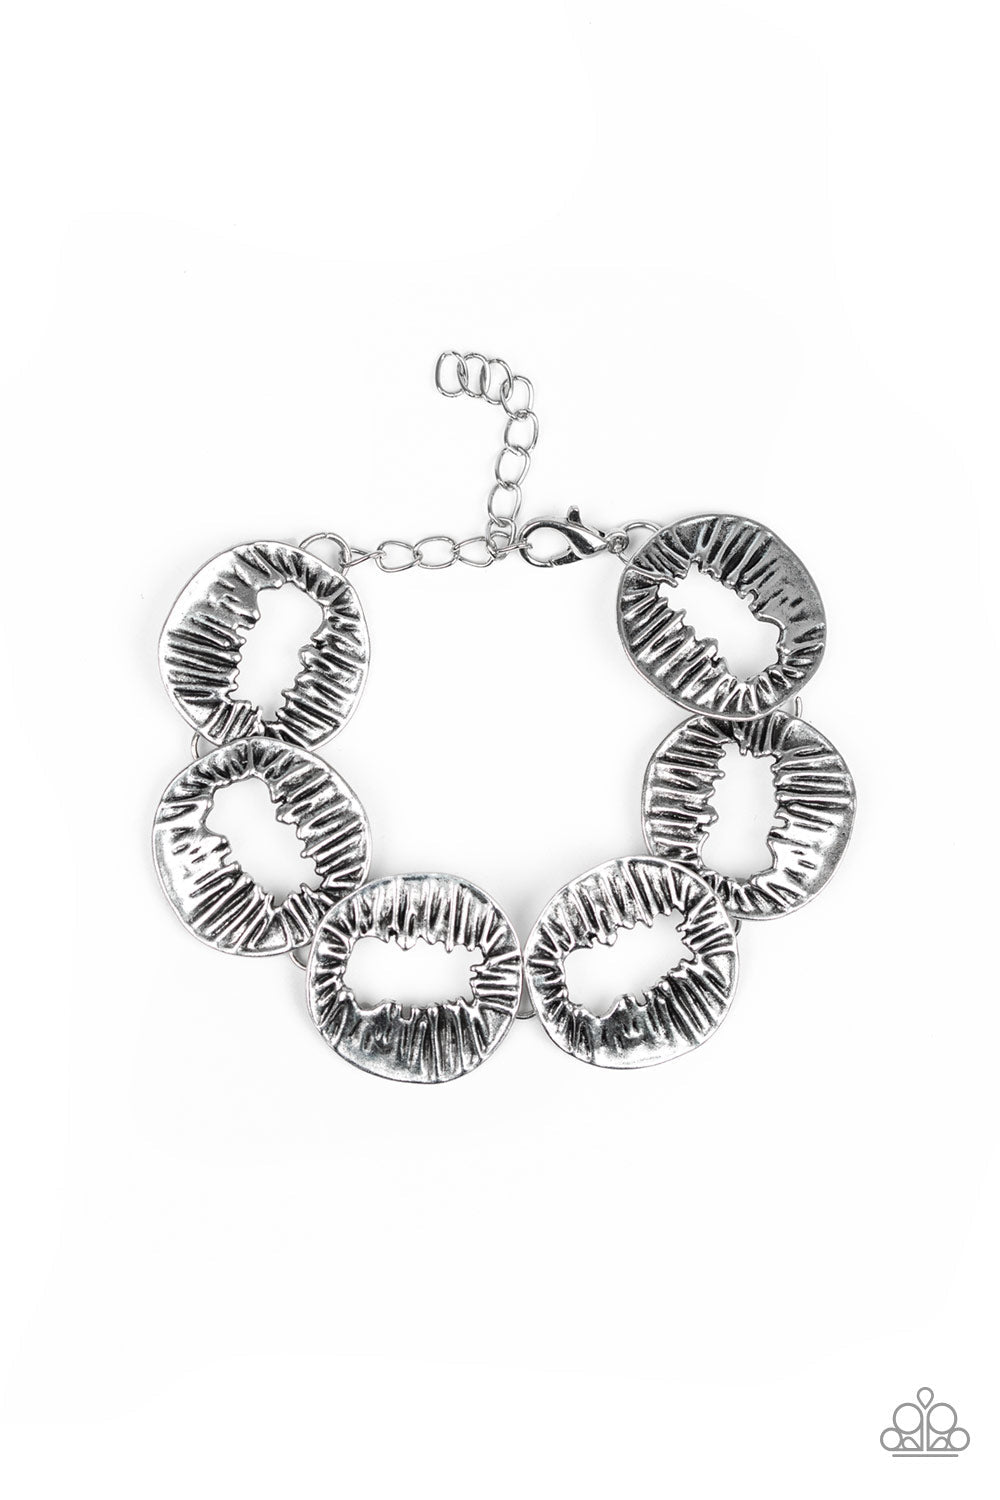 Cut It Out Silver Bracelet - Paparazzi Accessories- lightbox - CarasShop.com - $5 Jewelry by Cara Jewels